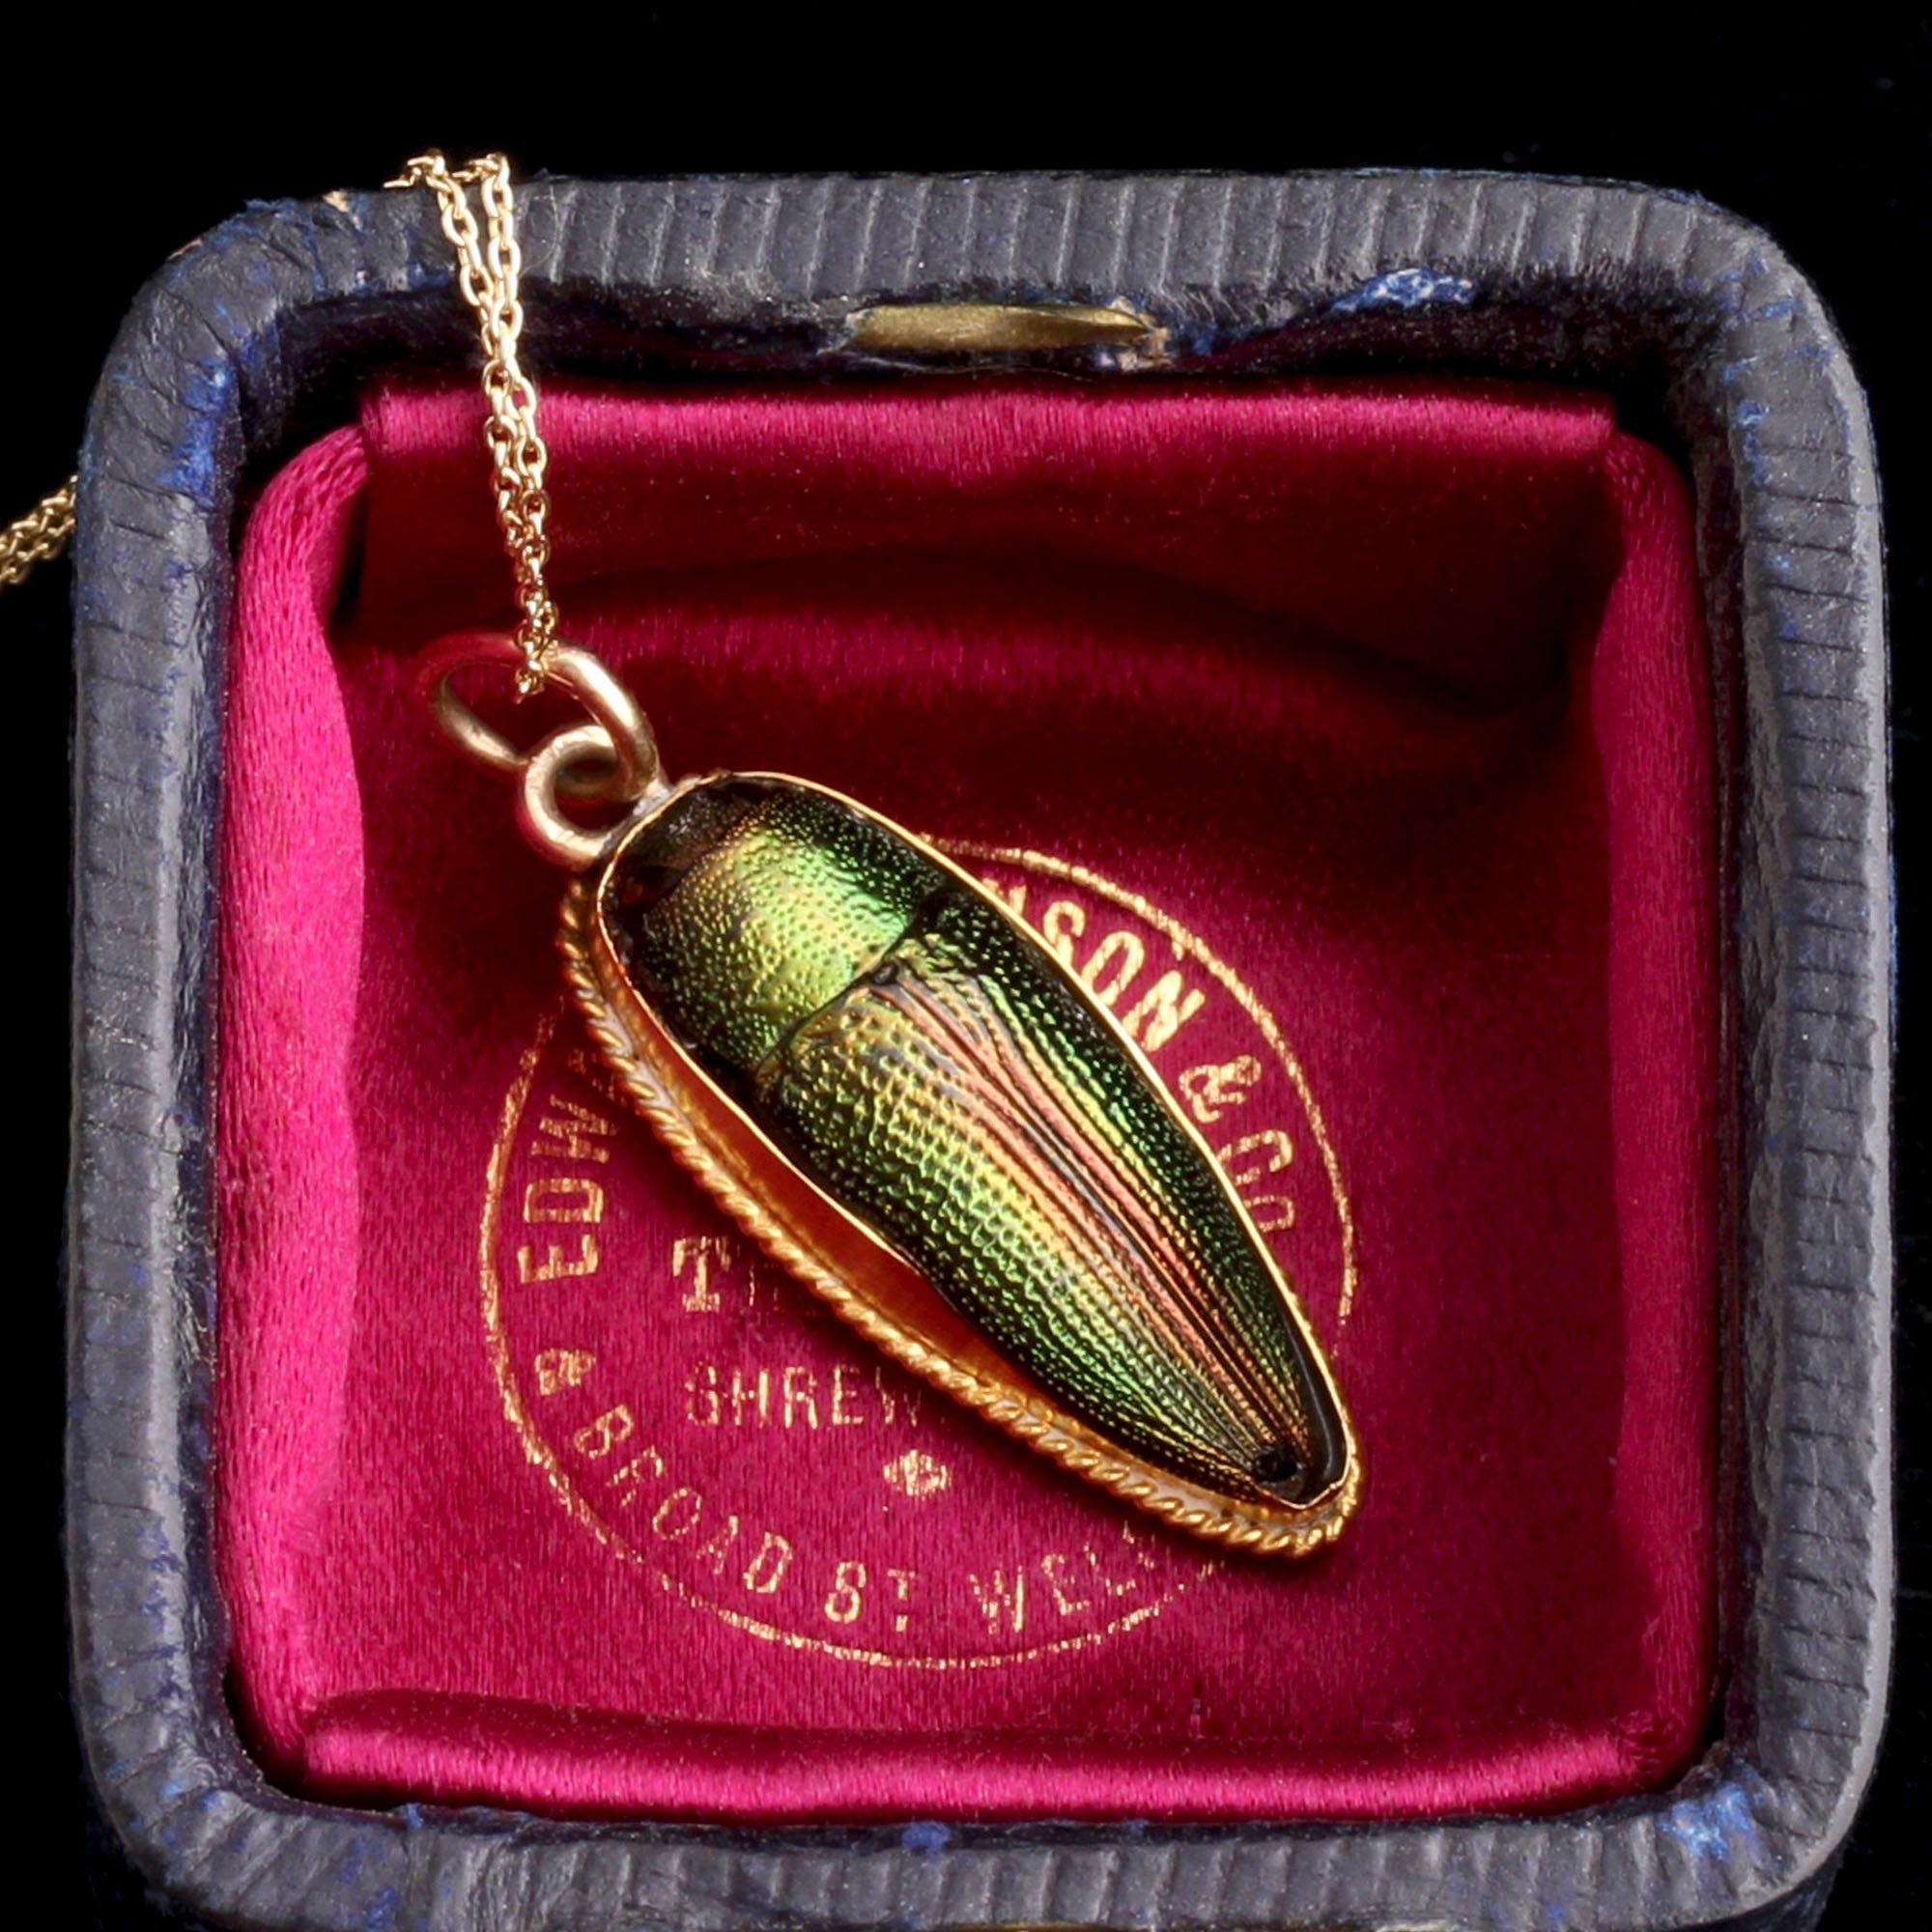 Victorian Gold-Mounted Beetle Necklace